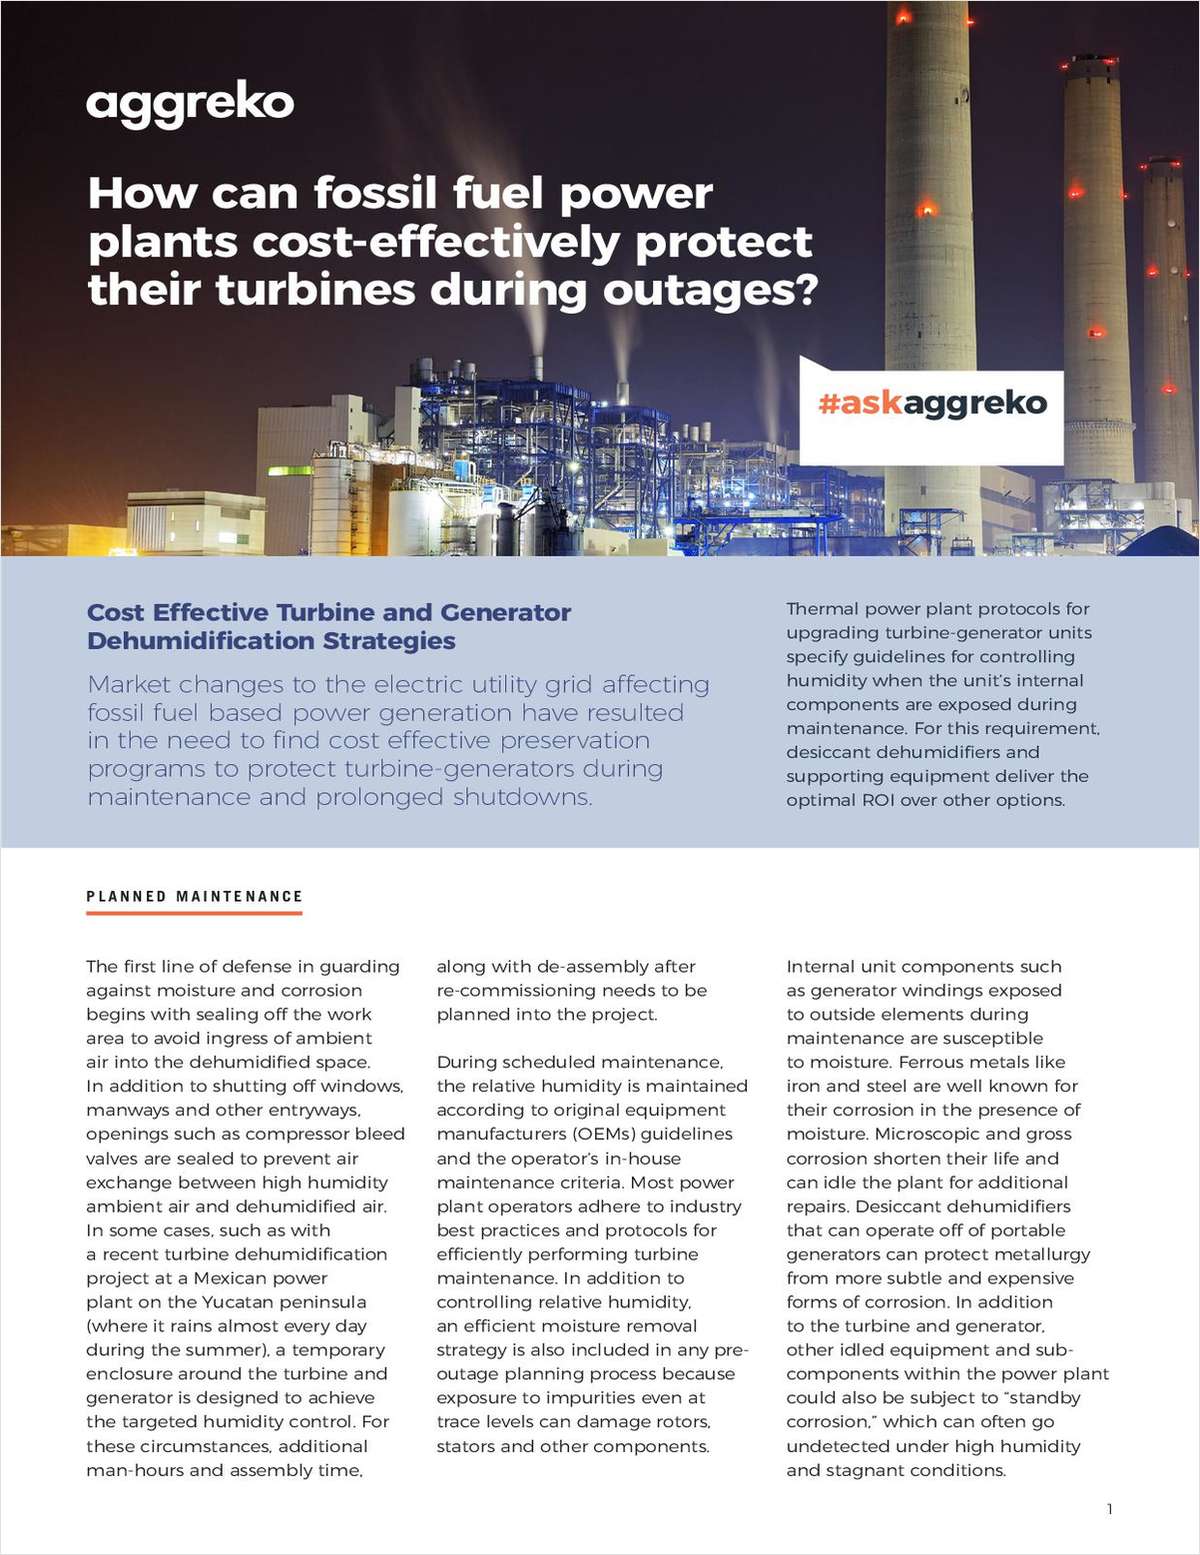 How can fossil fuel power plants cost-effectively protect their turbines during outages?